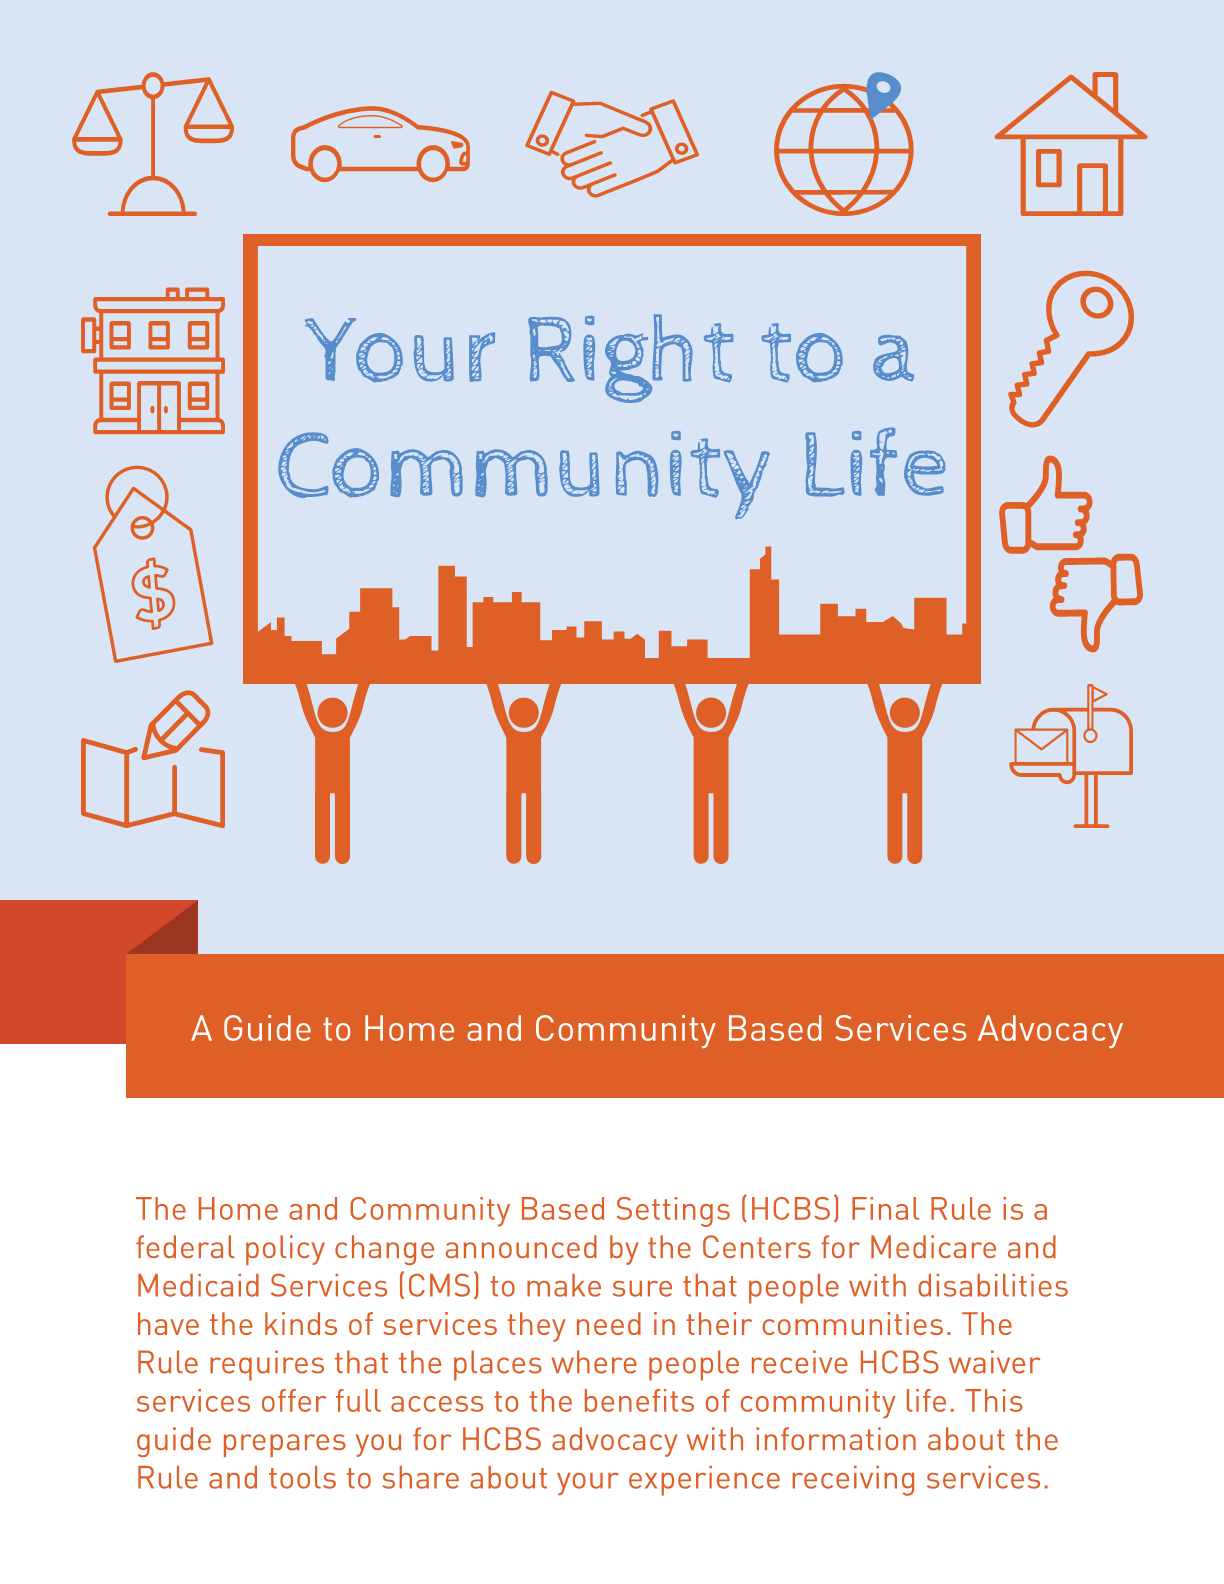 Your Right to a Community Life: A Guide to Home and Community Based Services Advocacy